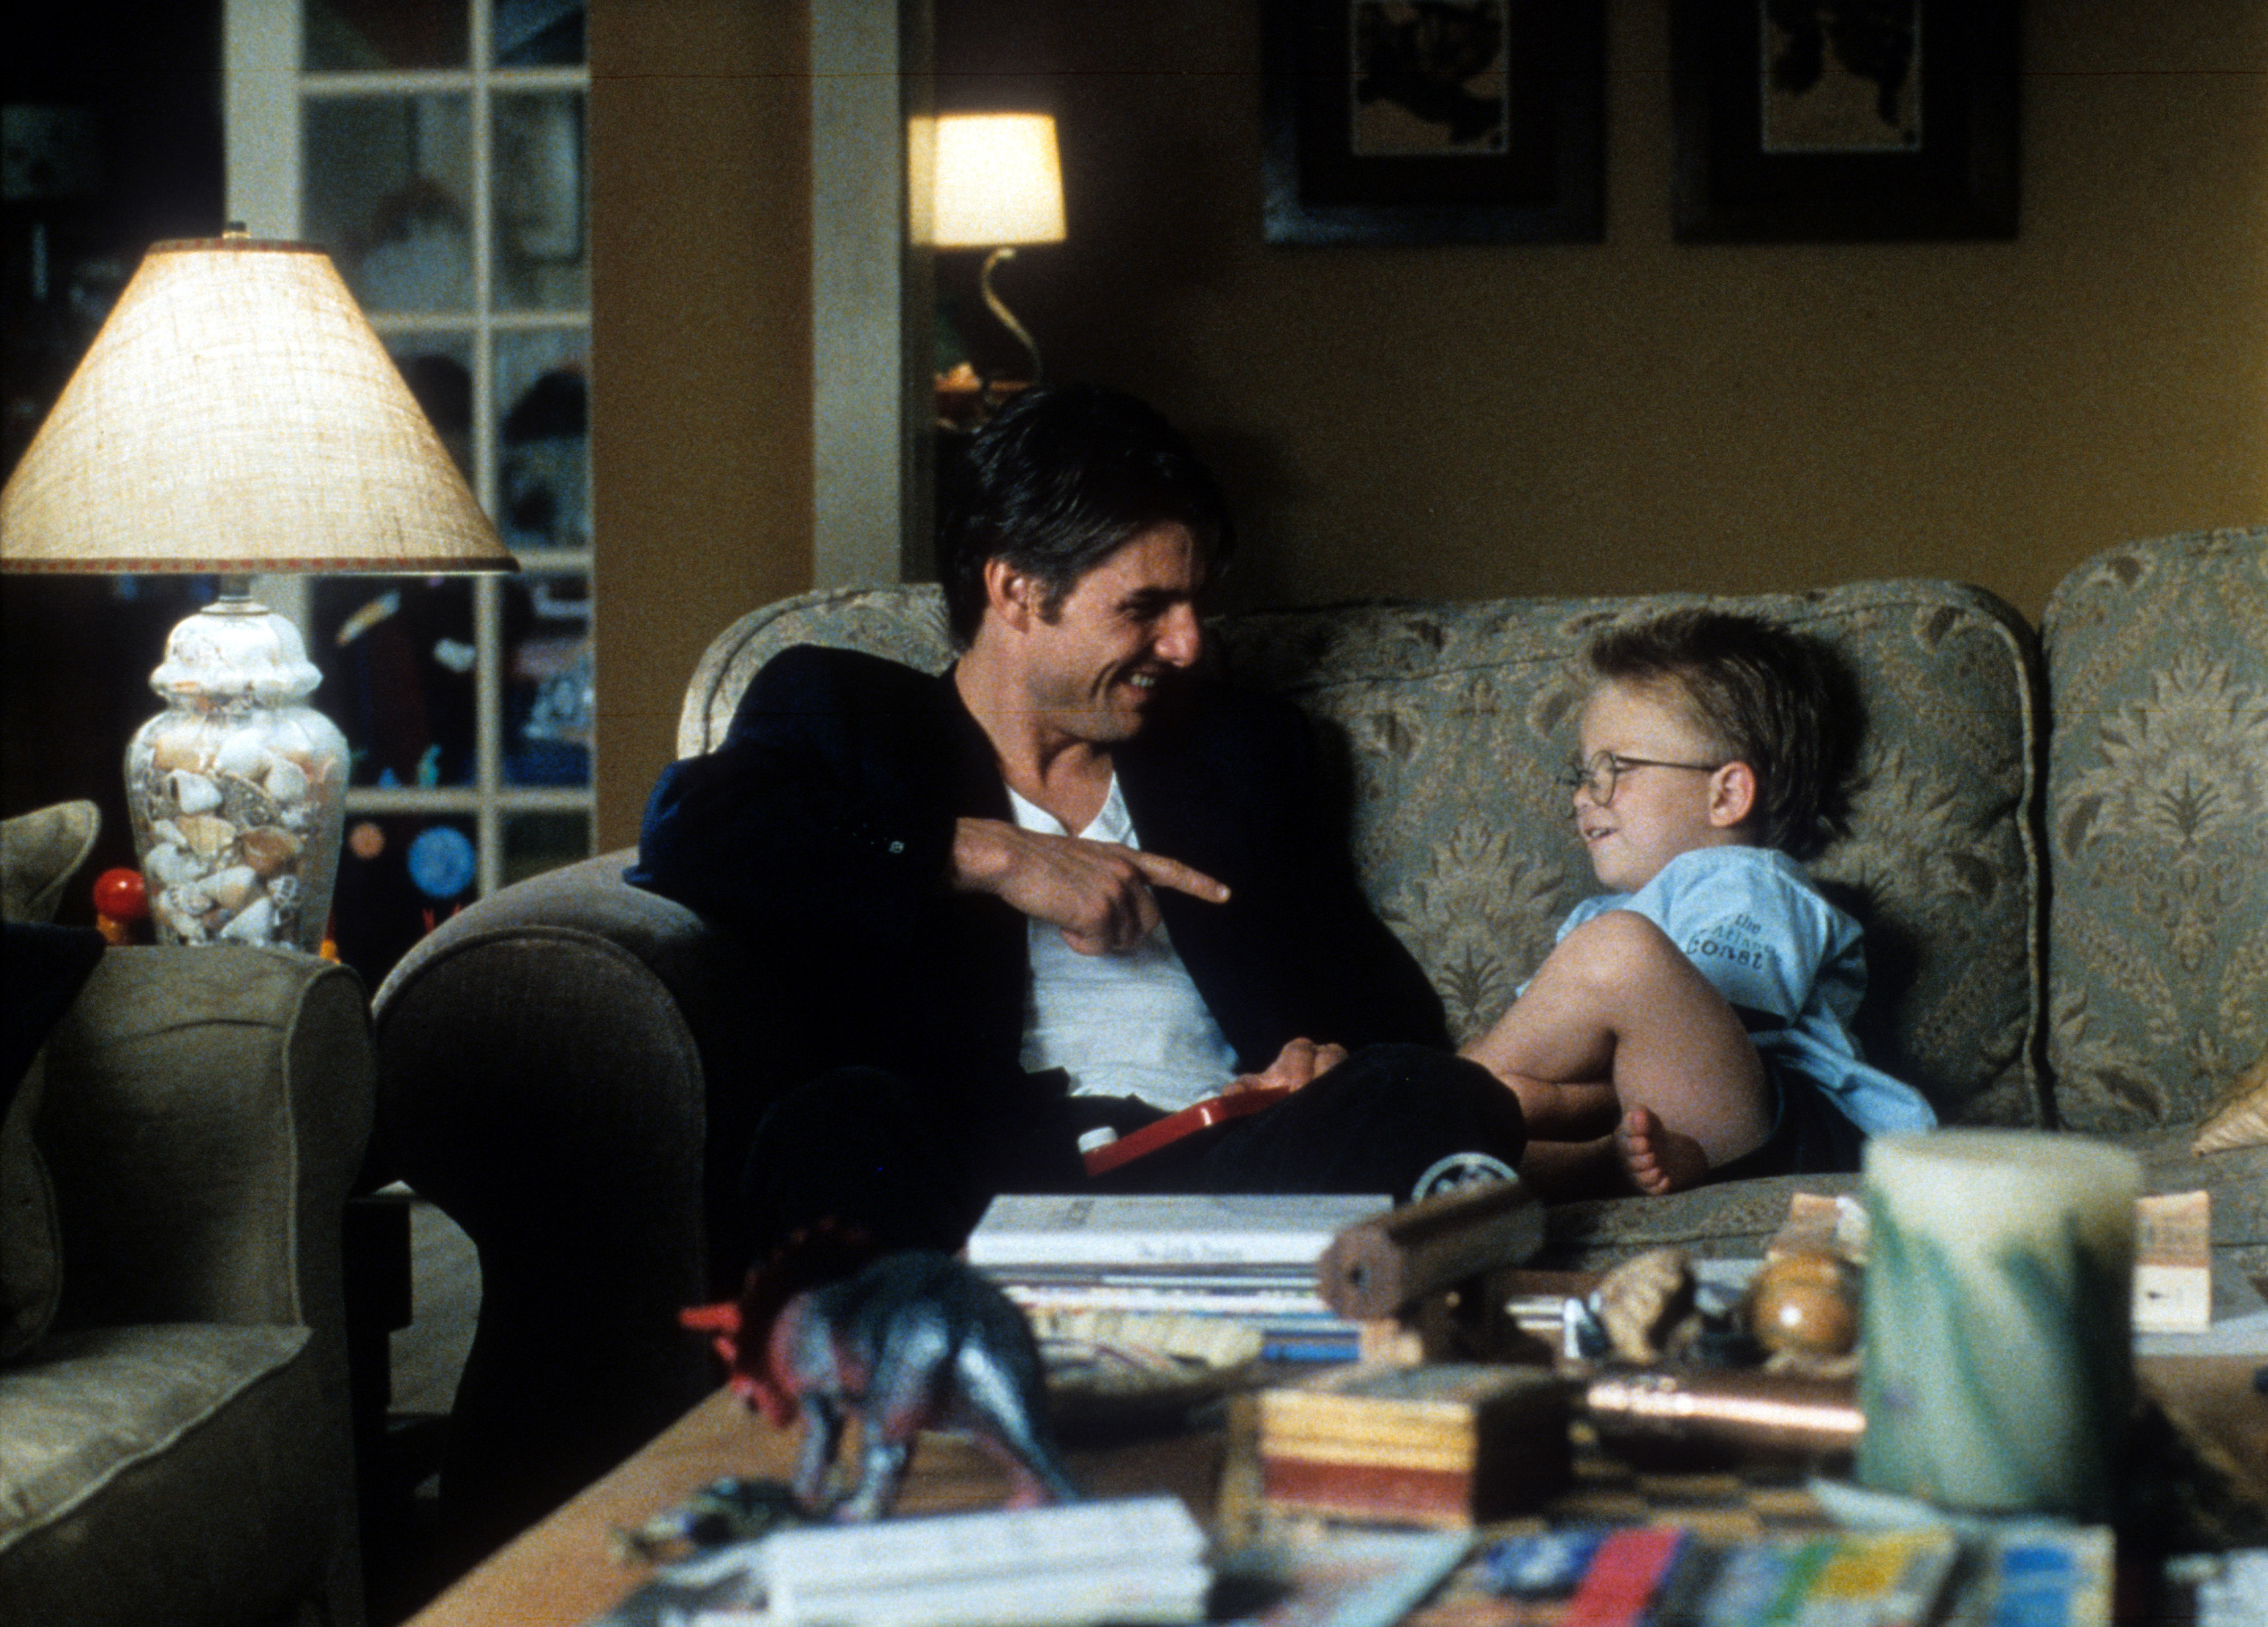 Tom Cruise with the child actor during a scene from "Jerry Maguire" in 1996 | Source: Getty Images